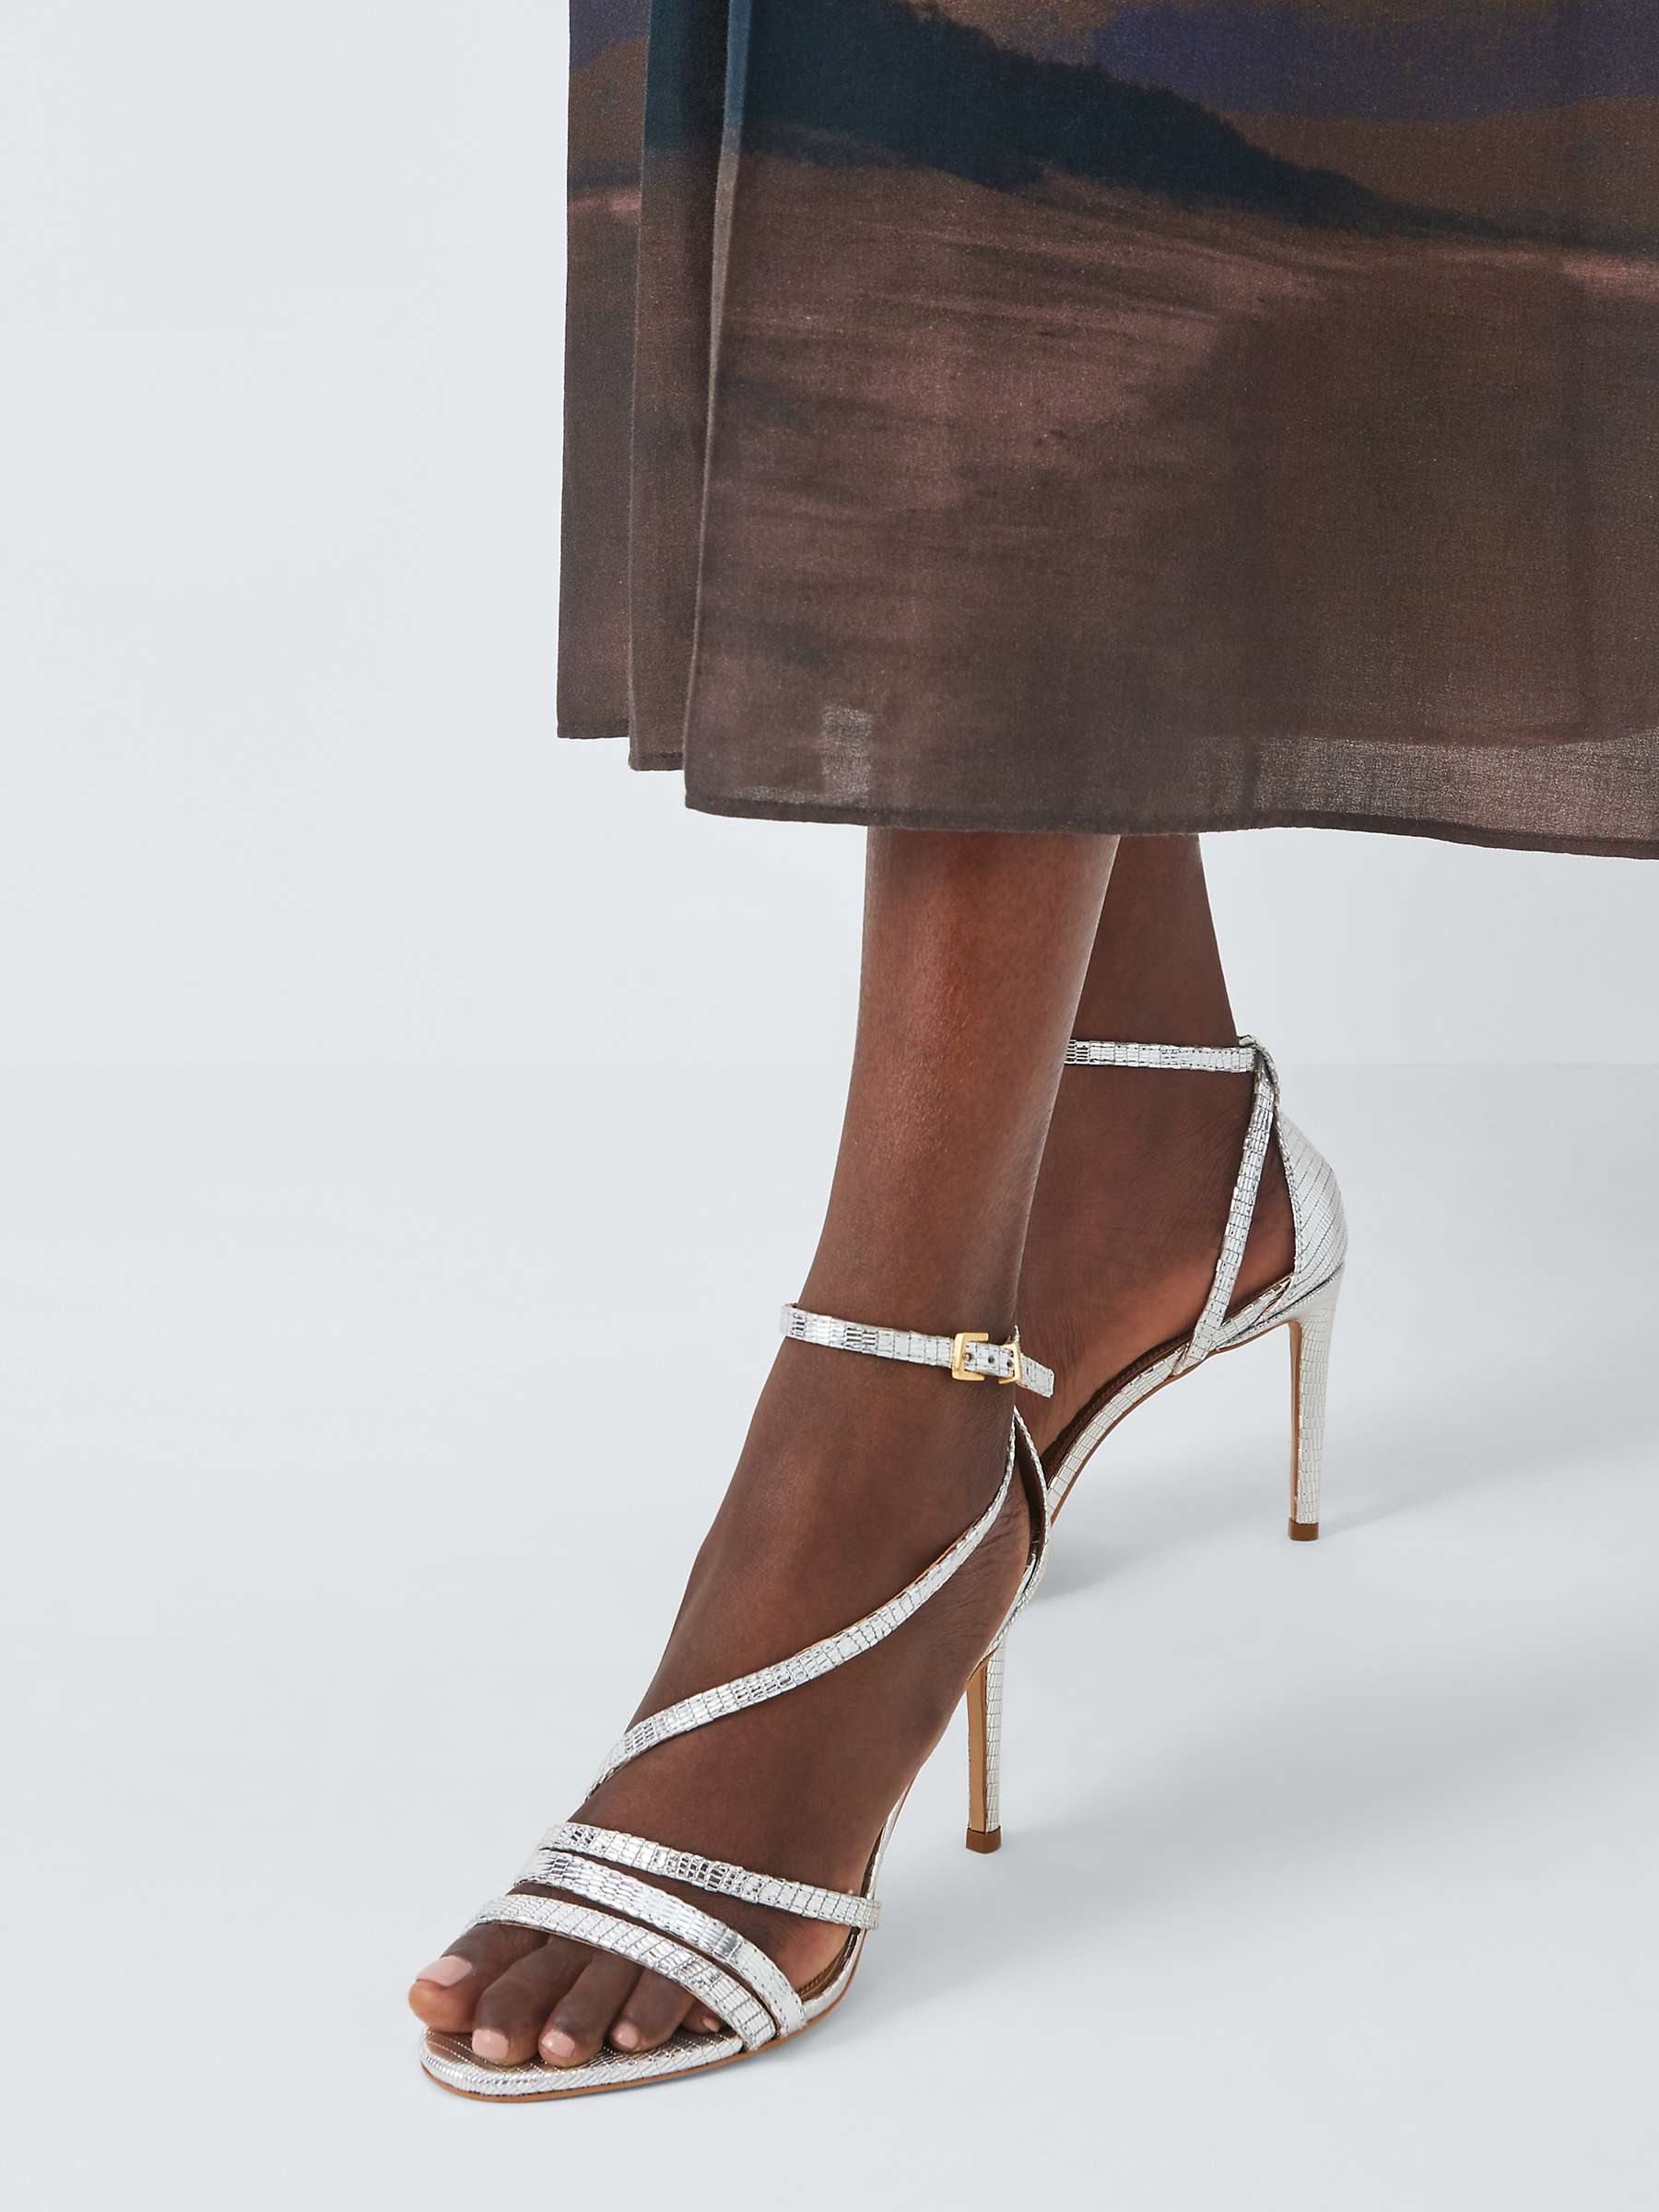 Buy John Lewis Maia Leather Asymmetric Strappy High Heel Sandals, Silver Online at johnlewis.com